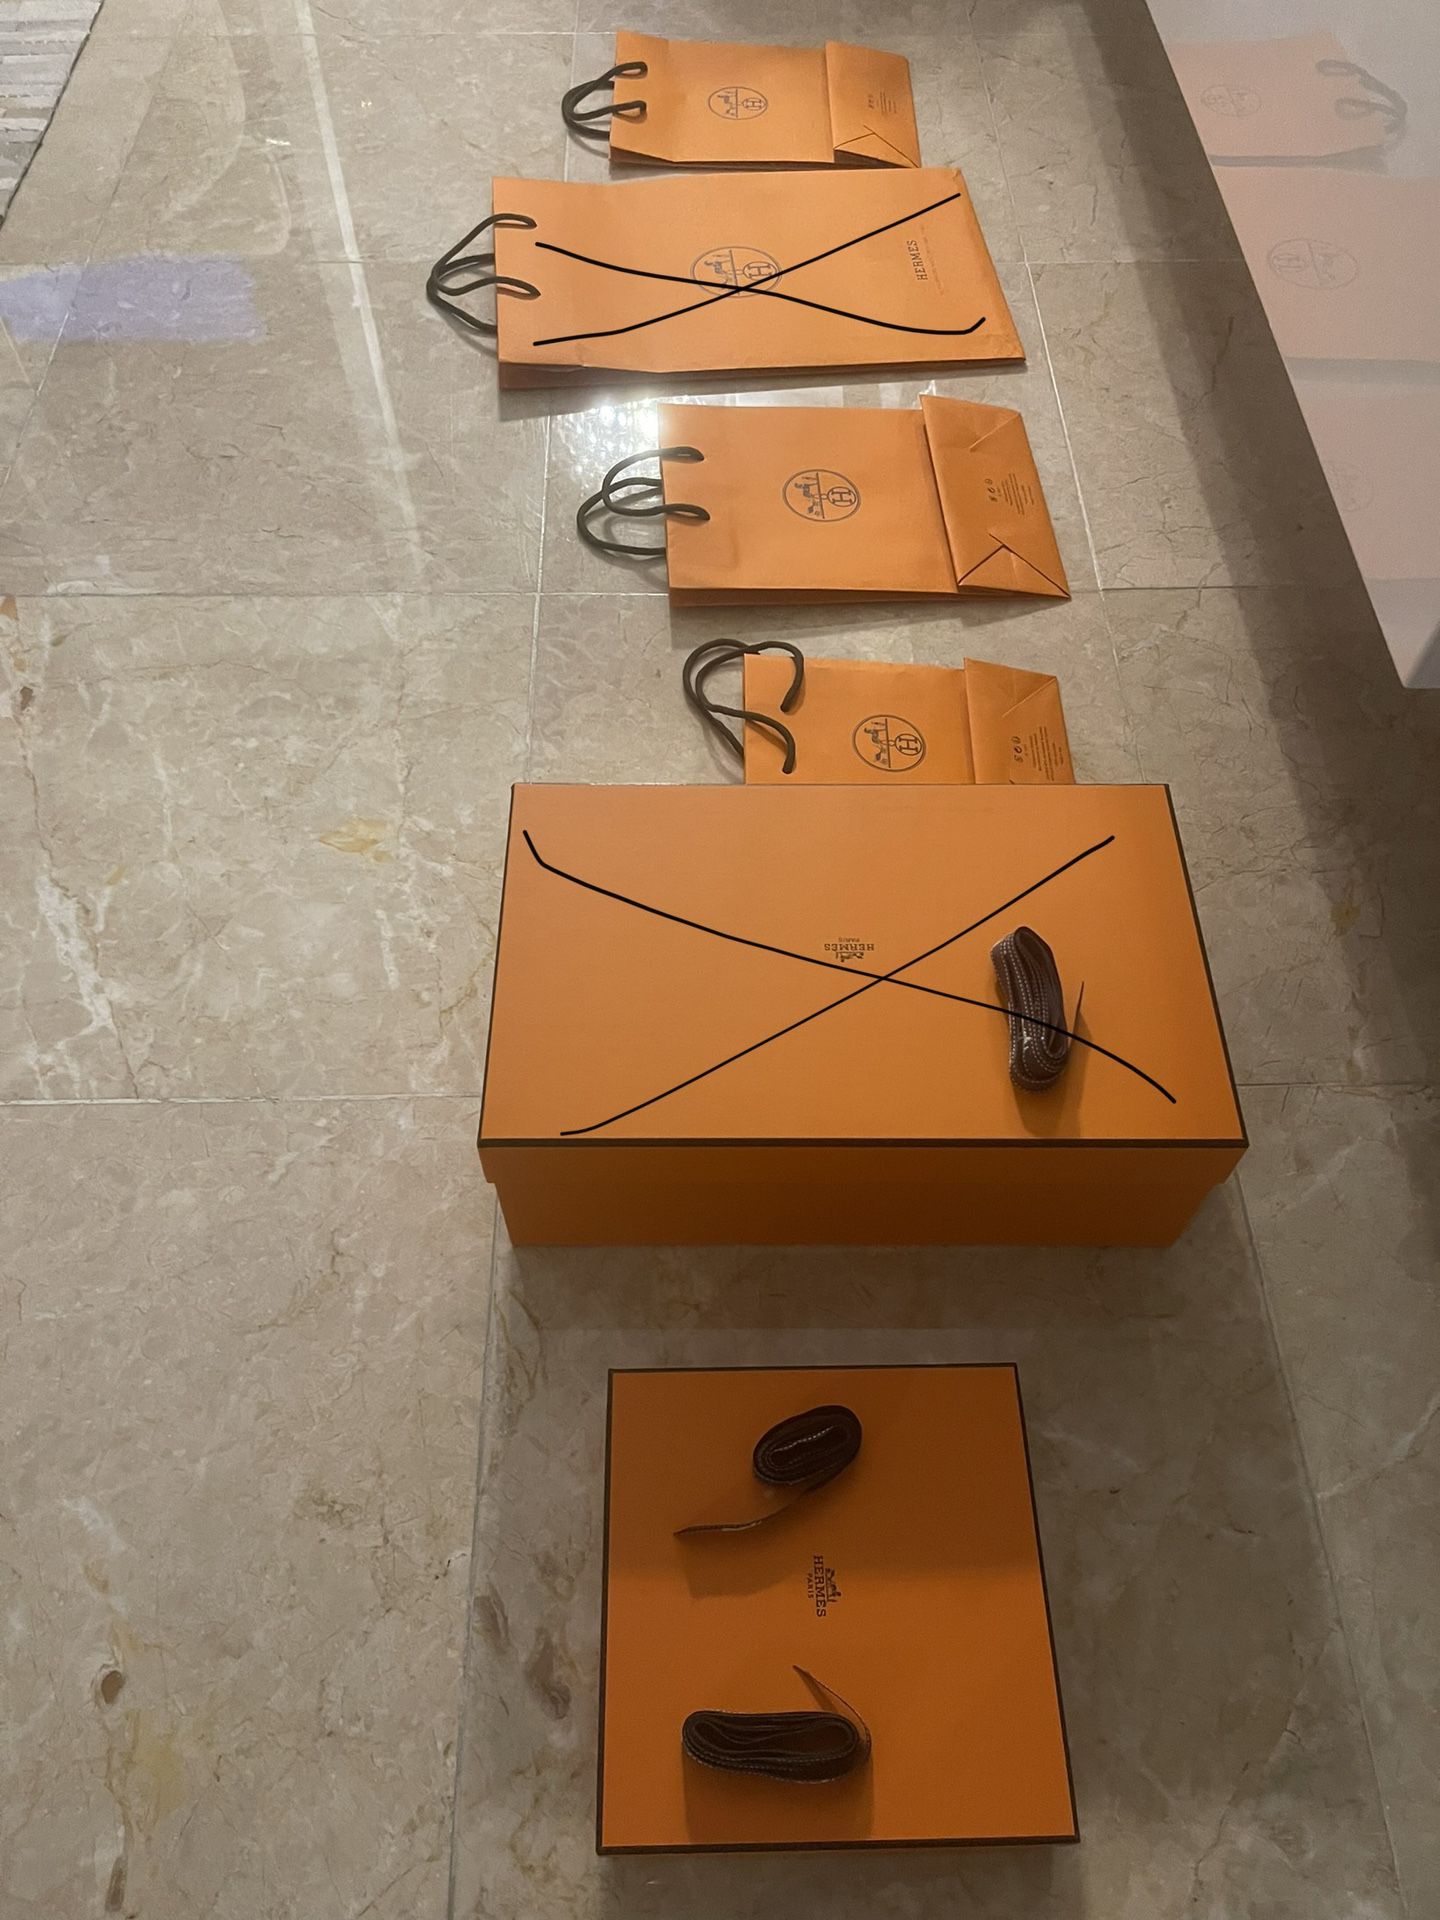 Hermes Bags (3) Ribbons (2) Belt Box (1) for Sale in Miami, FL